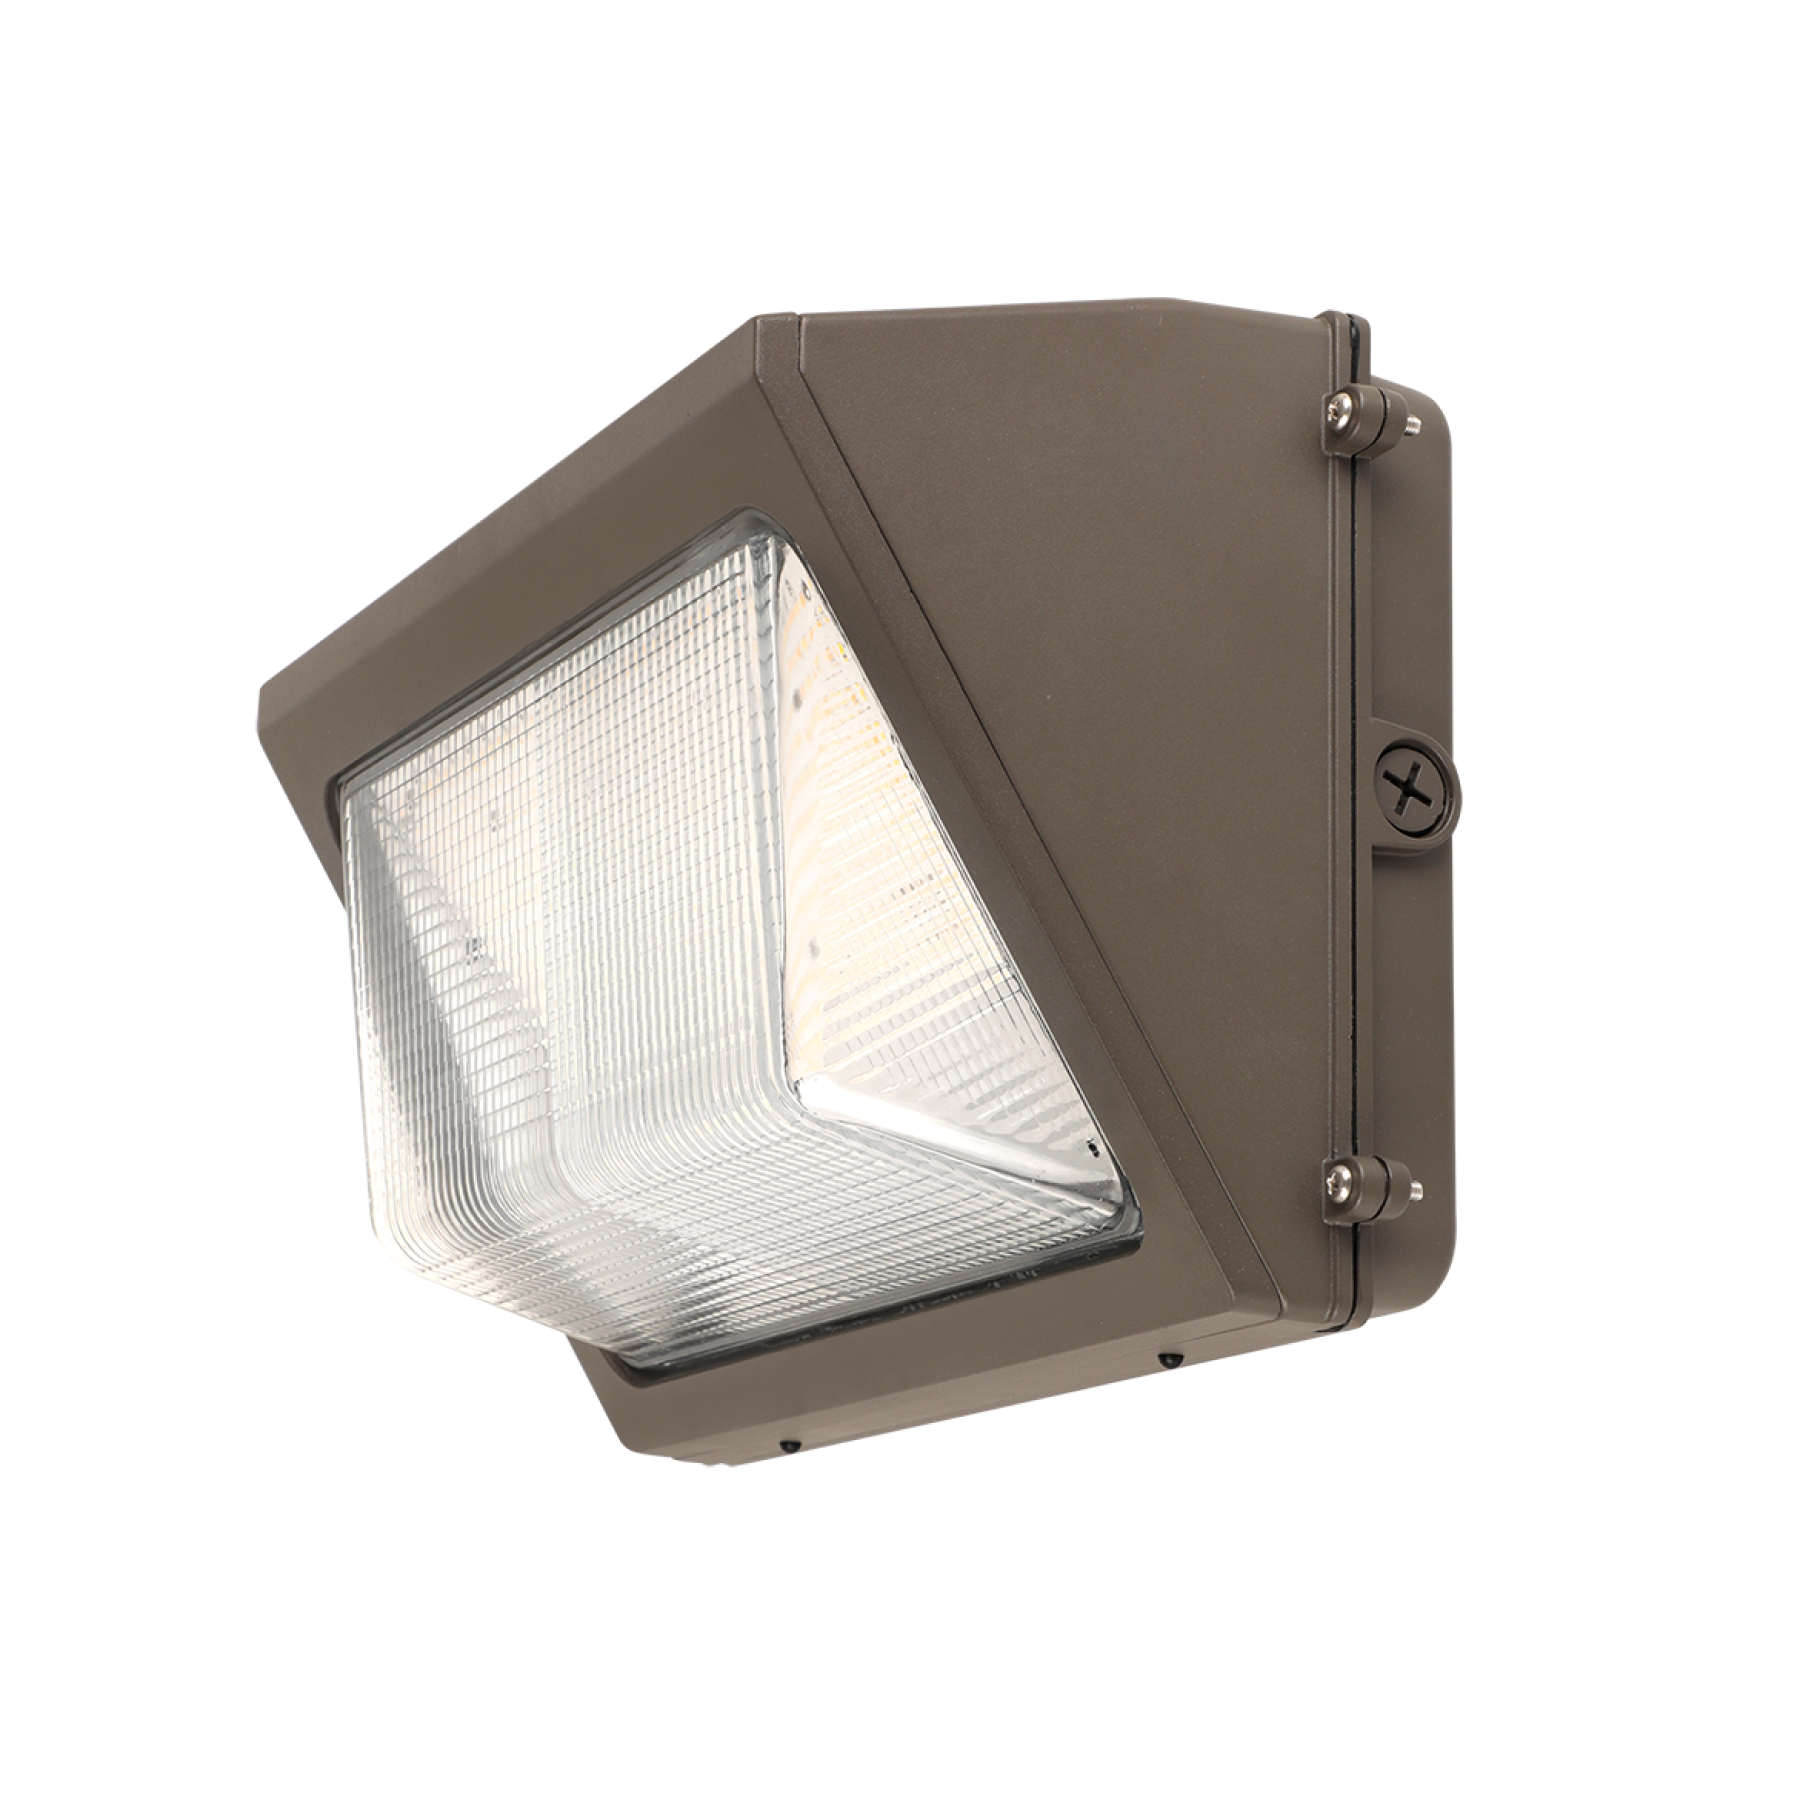 LED Wall Pack Light - 45W/60W/75W Wattage Adjustable - 3000K/4000K/5000K Color Changeable 10125Lumens - 120-277VAC - 0-10V Dimmable - UL Listed - 5 Years Warranty